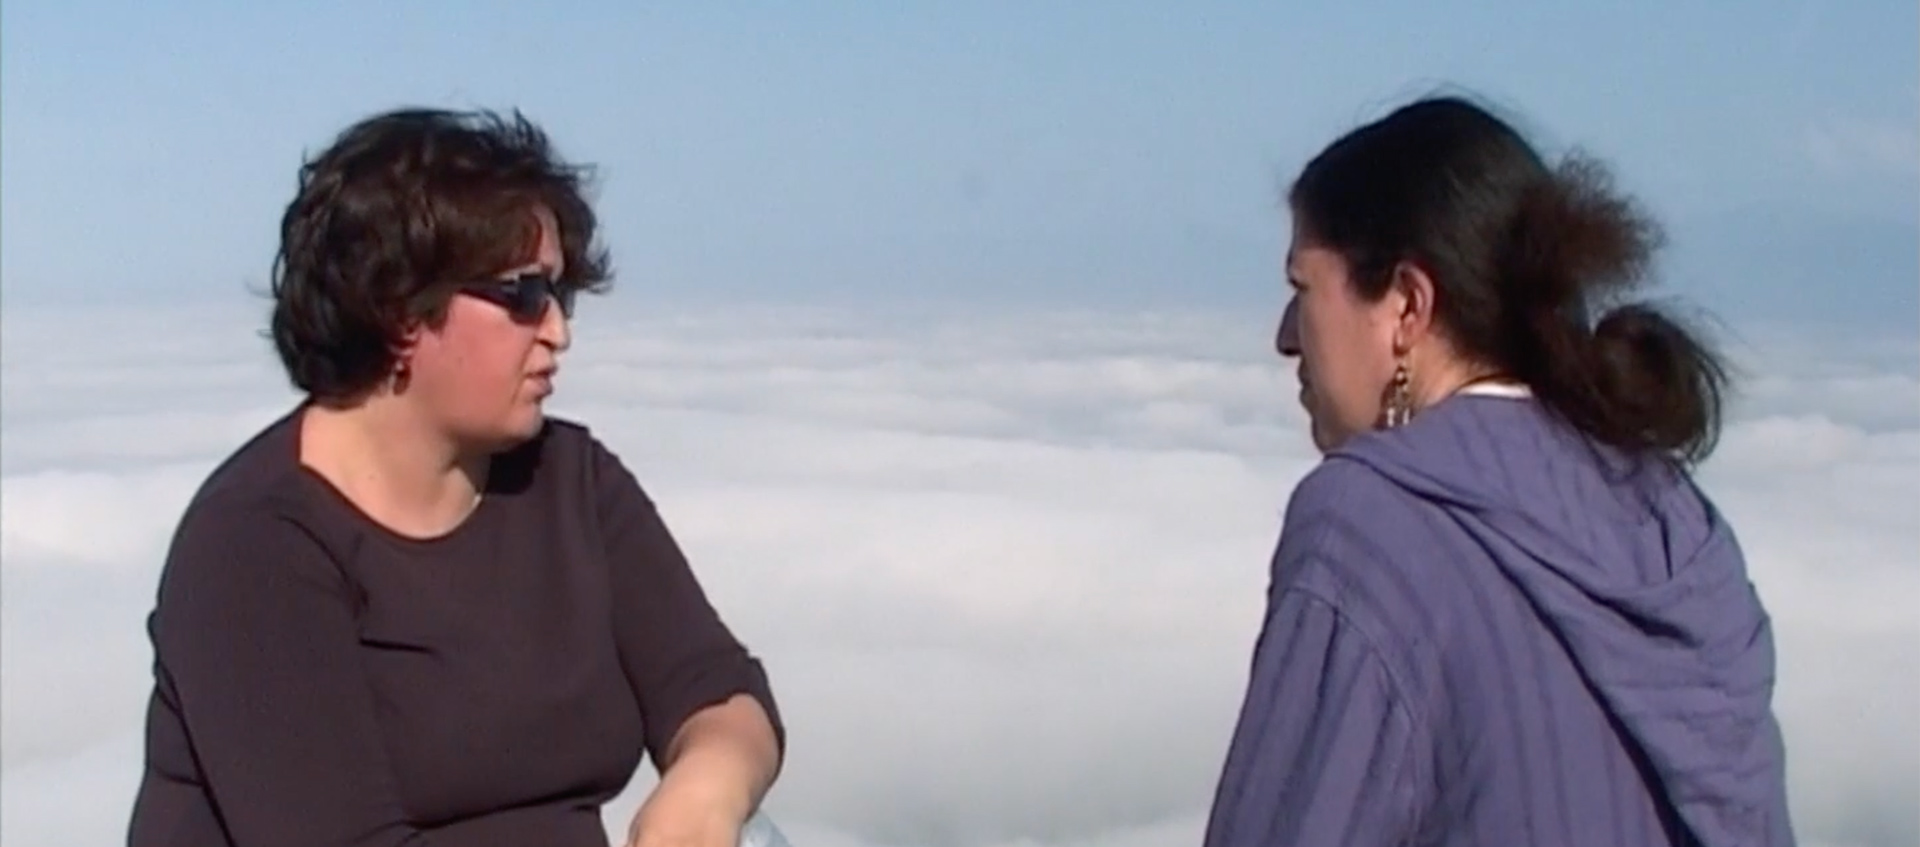 Two women having a conversation on a high altitude with clouds behind in the scene. 